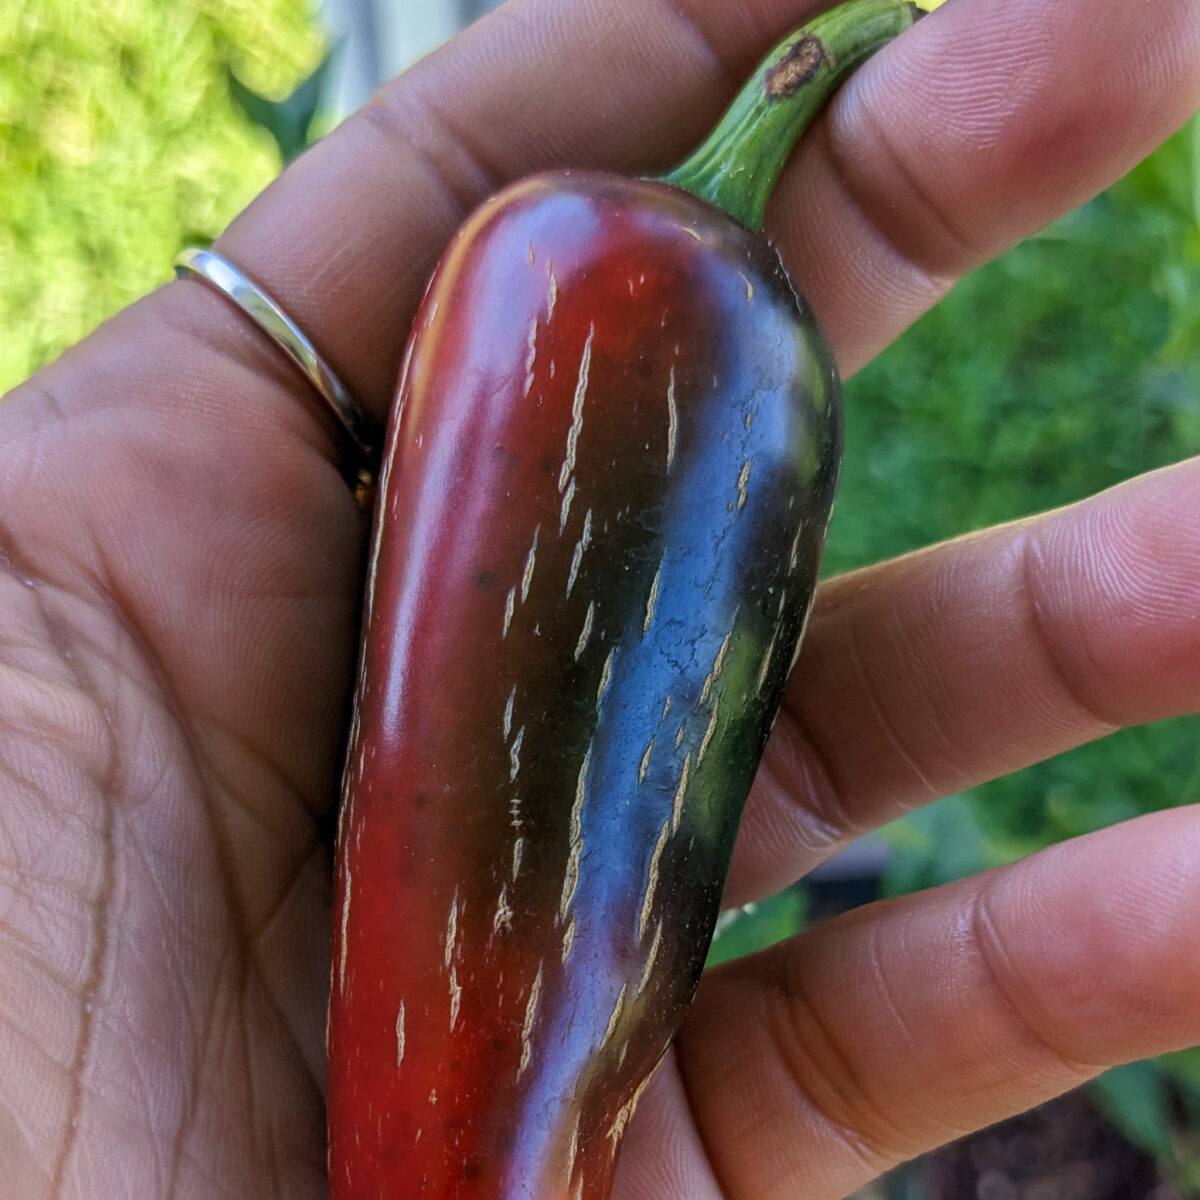 The Scoville Scale For Chili Peppers